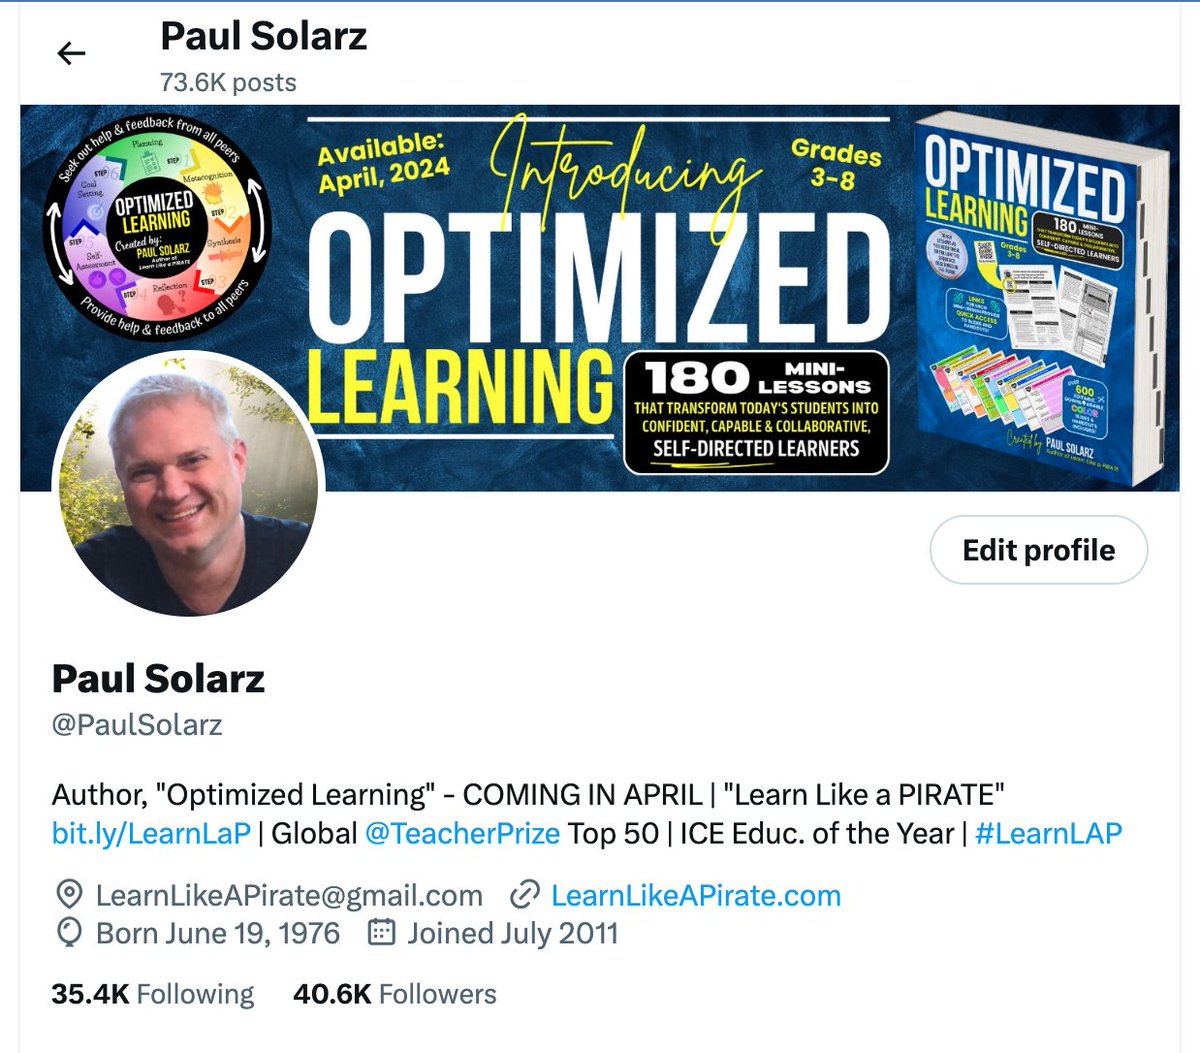 I JUST changed my Twitter Profile picture for the first time since 2011! Boy did I age! ;)

#LearnLAP #tlap #LeadLAP #edchat #k12 #edtech #8thchat #7thchat #6thchat #mschat #5thchat #4thchat #3rdchat #ntchat #teachertwitter #teachers